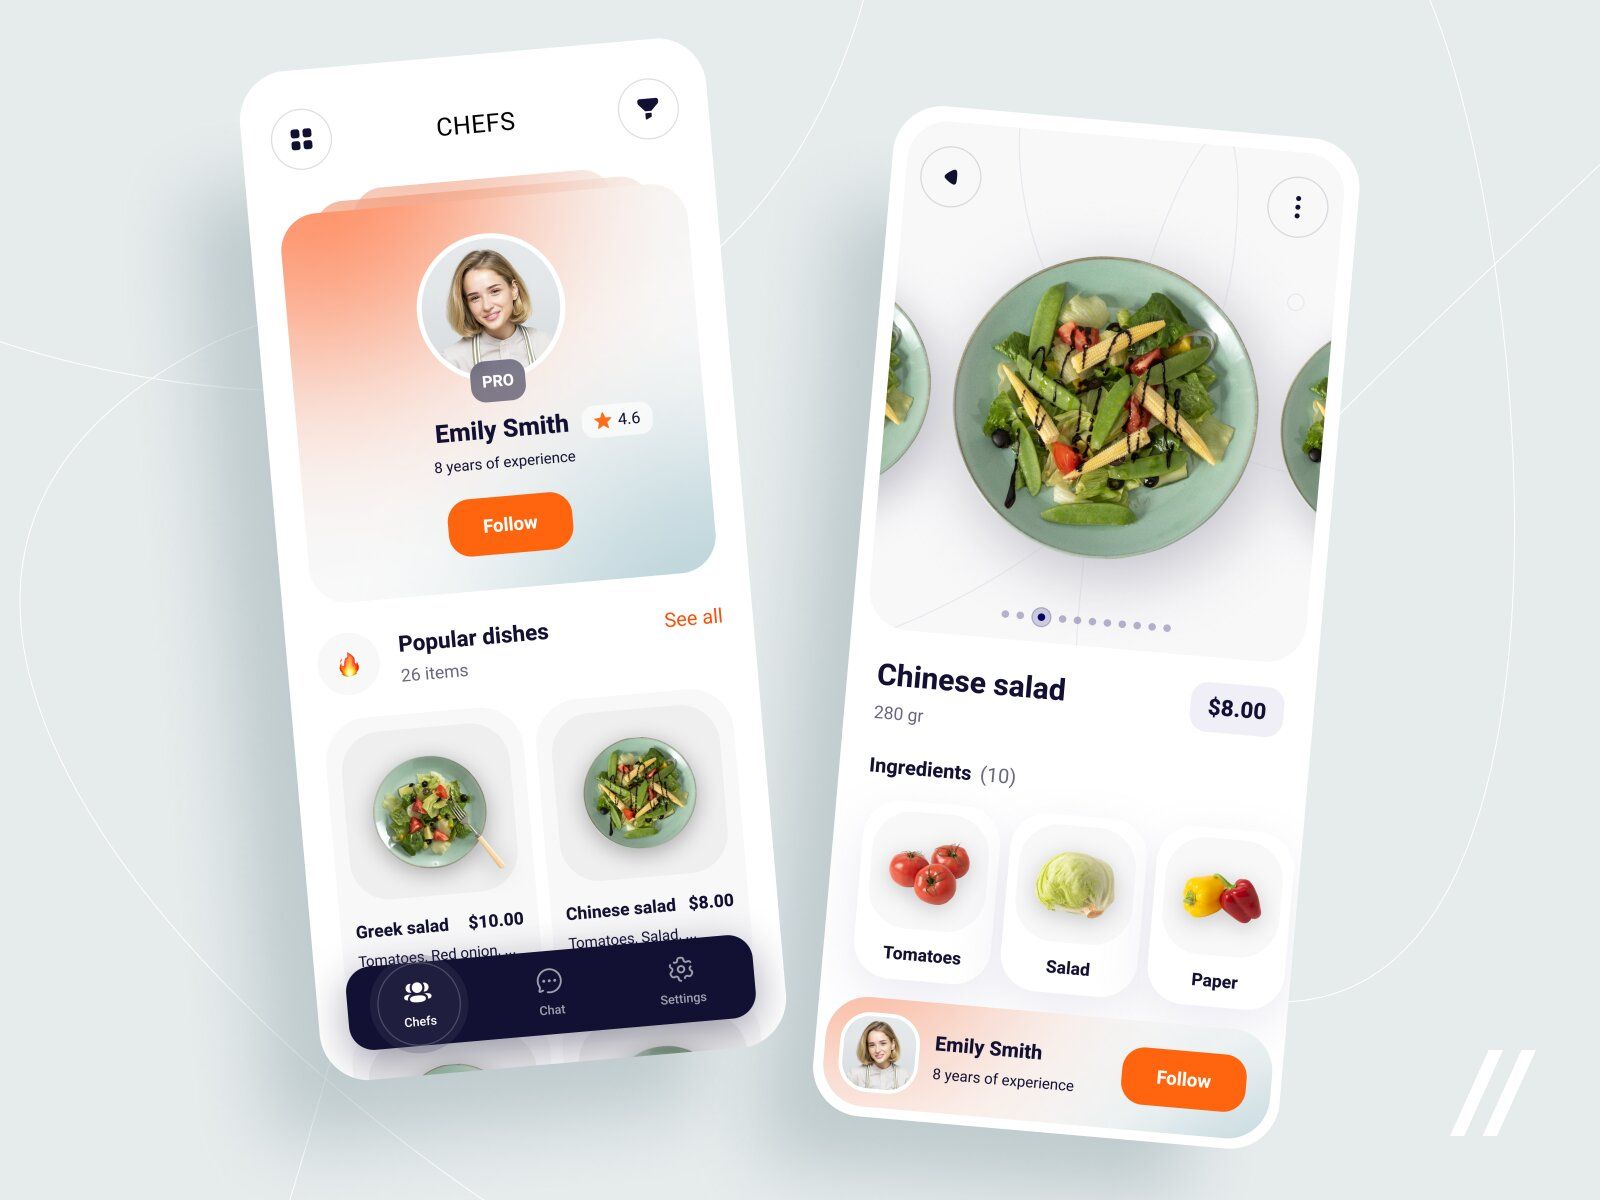 Food delivery apps like UberEats should also have a screen where customers could read a detailed information about each food option (*image by [Purrweb UI](https://dribbble.com/purrwebui){ rel="nofollow" target="_blank" .default-md}*)